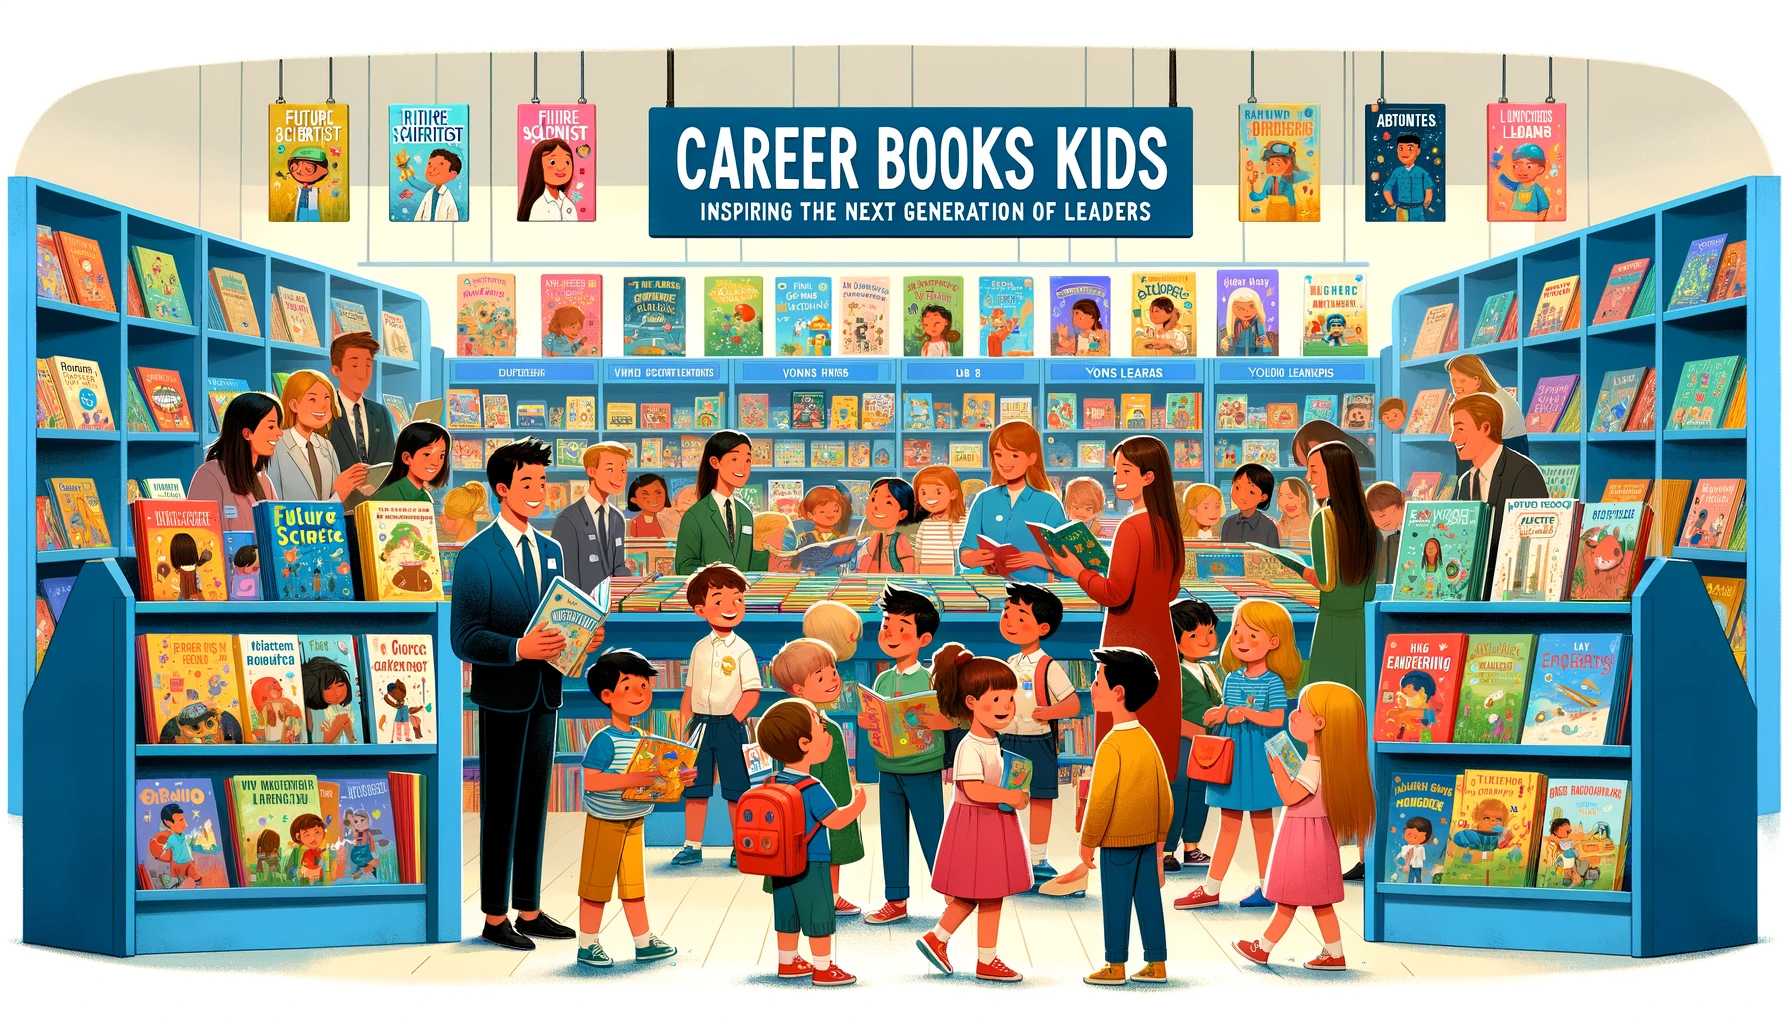 Career Books for Kids: Inspiring the Next Generation of Leaders